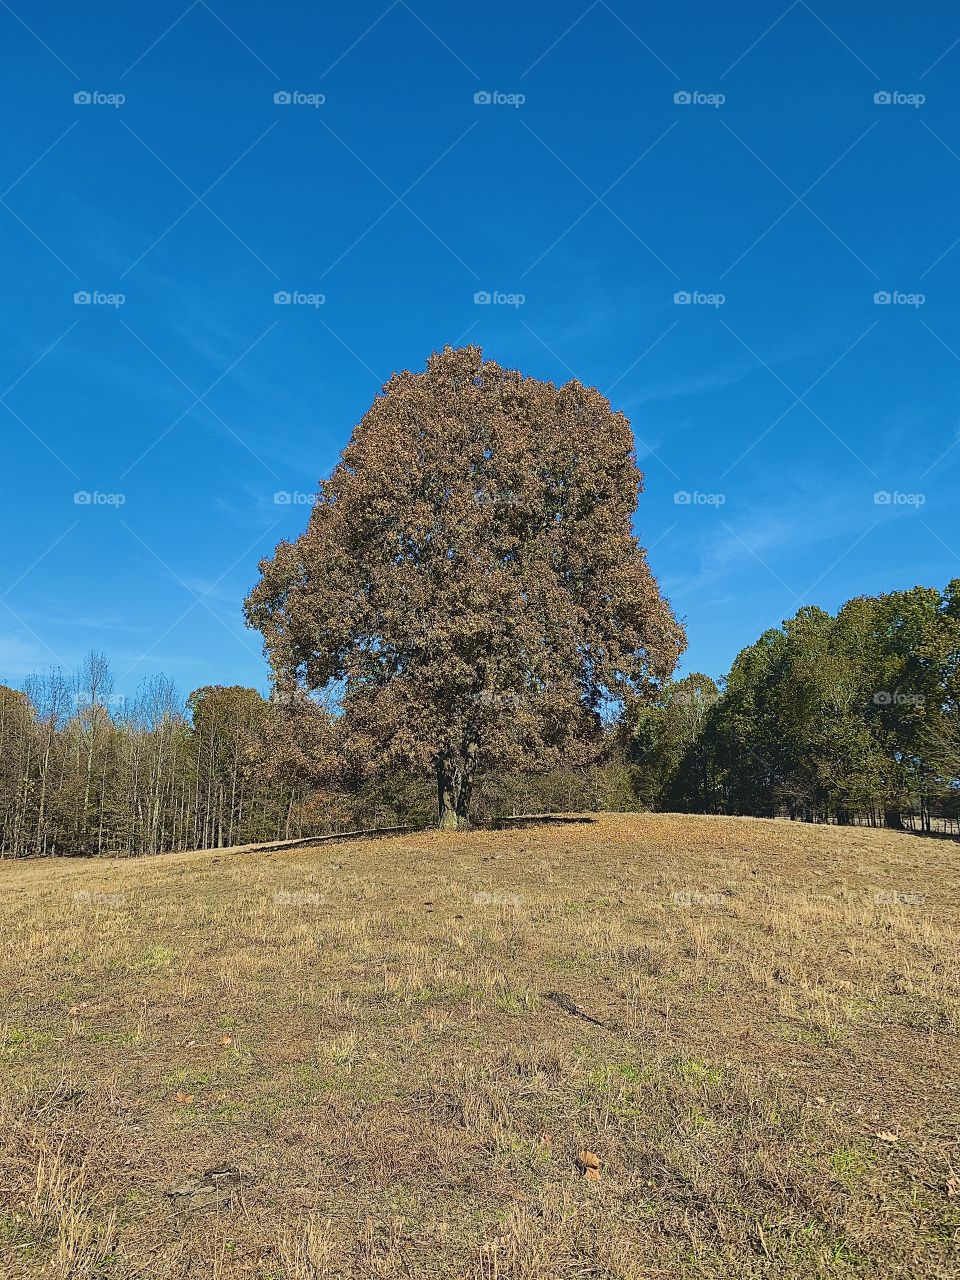 This is a beautiful tree in a vast field. It’s propped atop a hill with a beautiful landscape surrounding it.